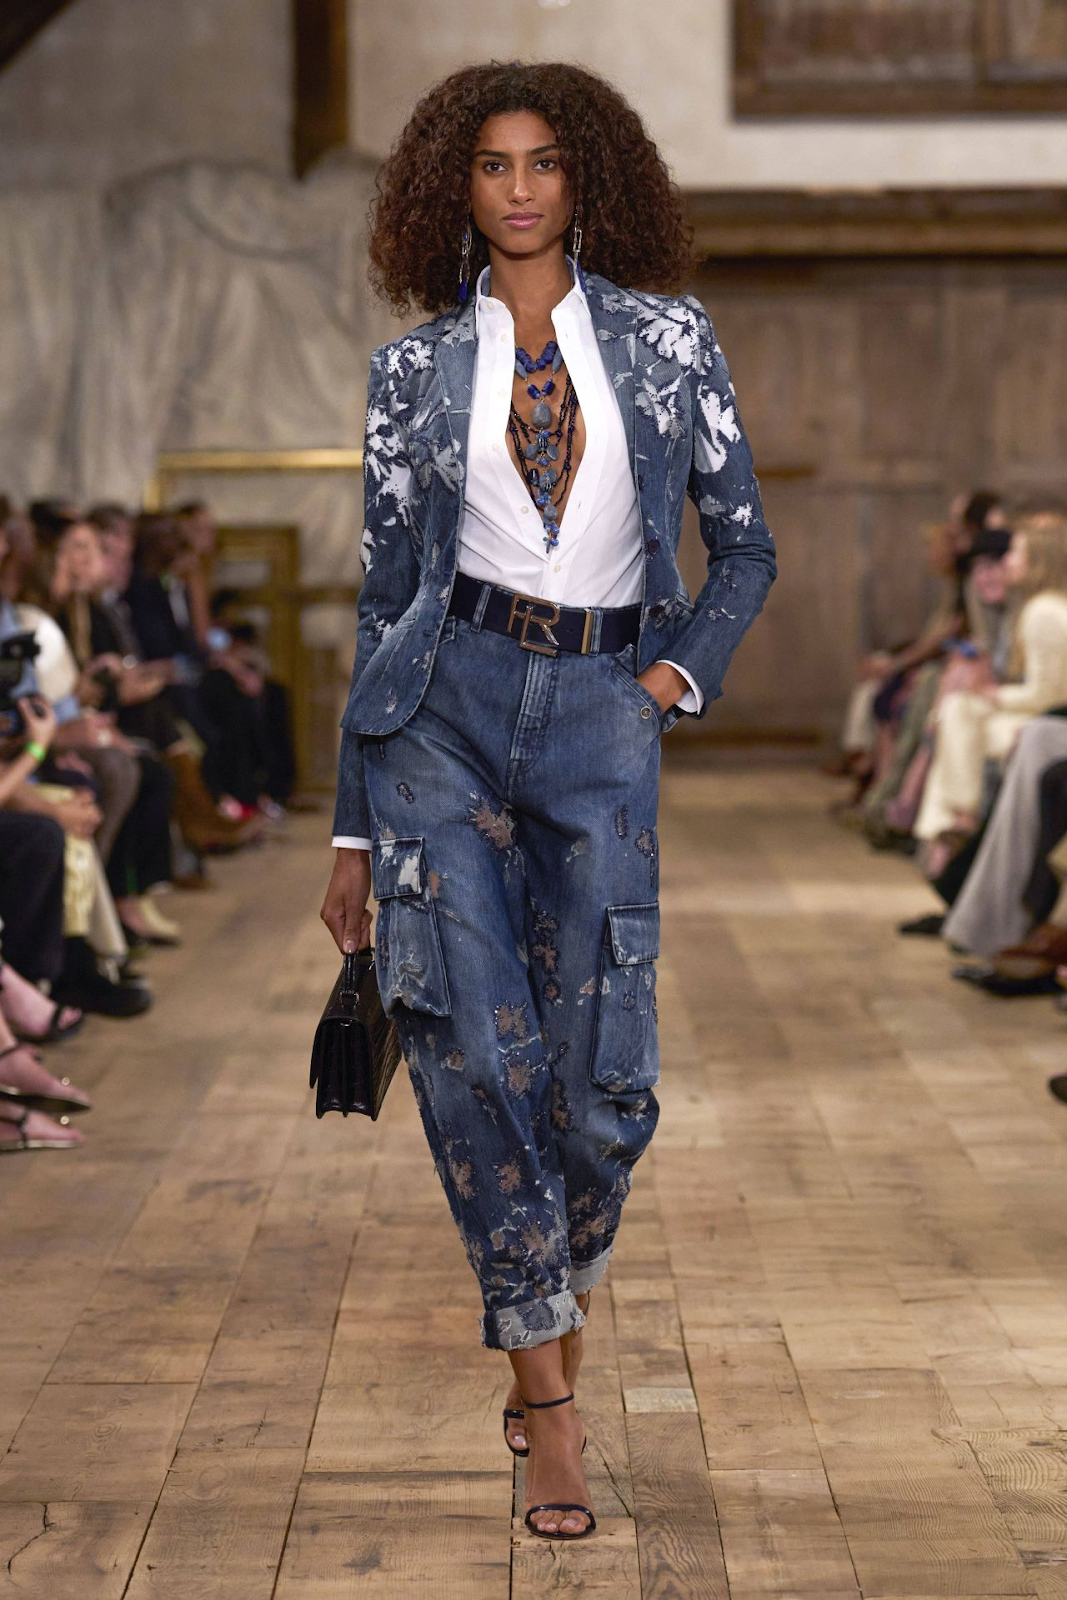 Stylish model on jeans for the fashion week